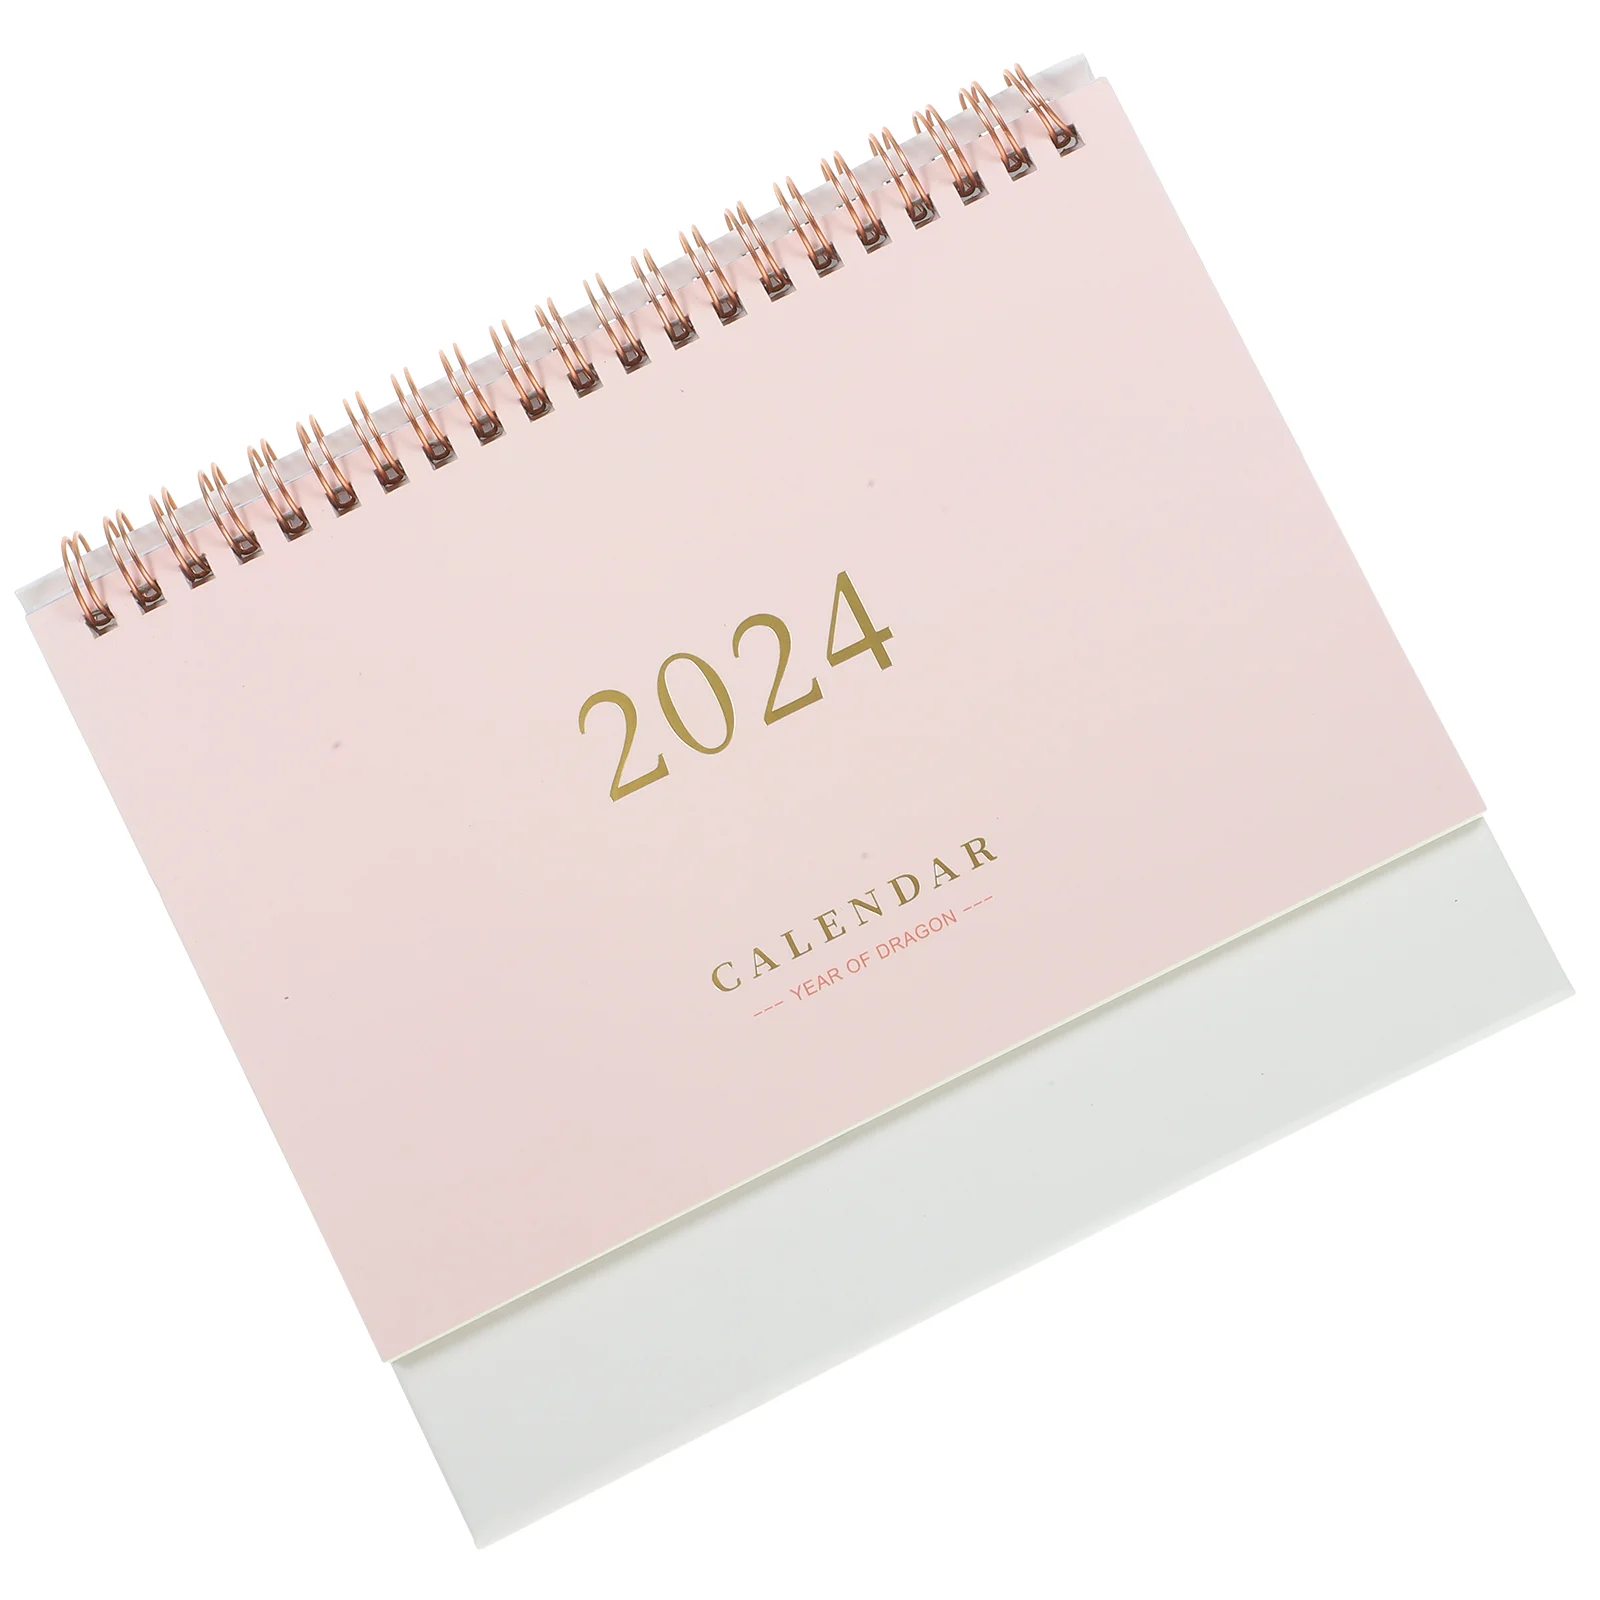 

Household Desk Calendar Daily Use Standing Desk Calendar Delicate Desktop Calendar Daily Schedule For Home Office School